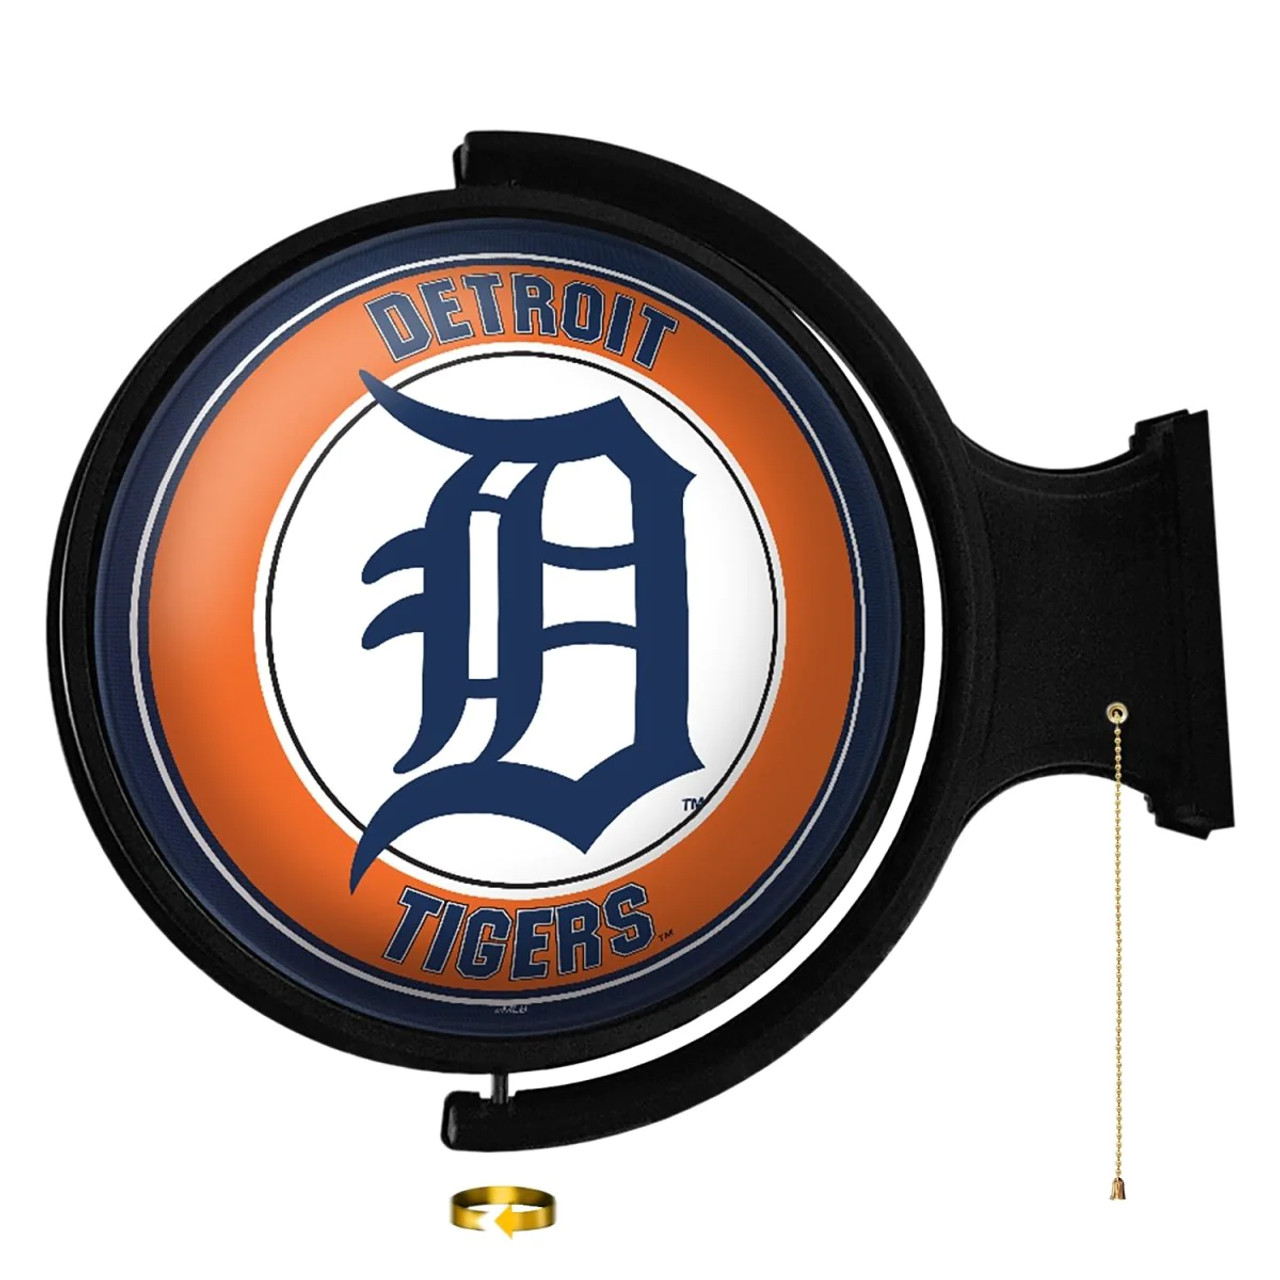 MBDETT-115-01, DET, Detroit, Tigers,  Original, Round, Rotating, Lighted, Wall, Sign, The Fan-Brand, 704384950196, LED